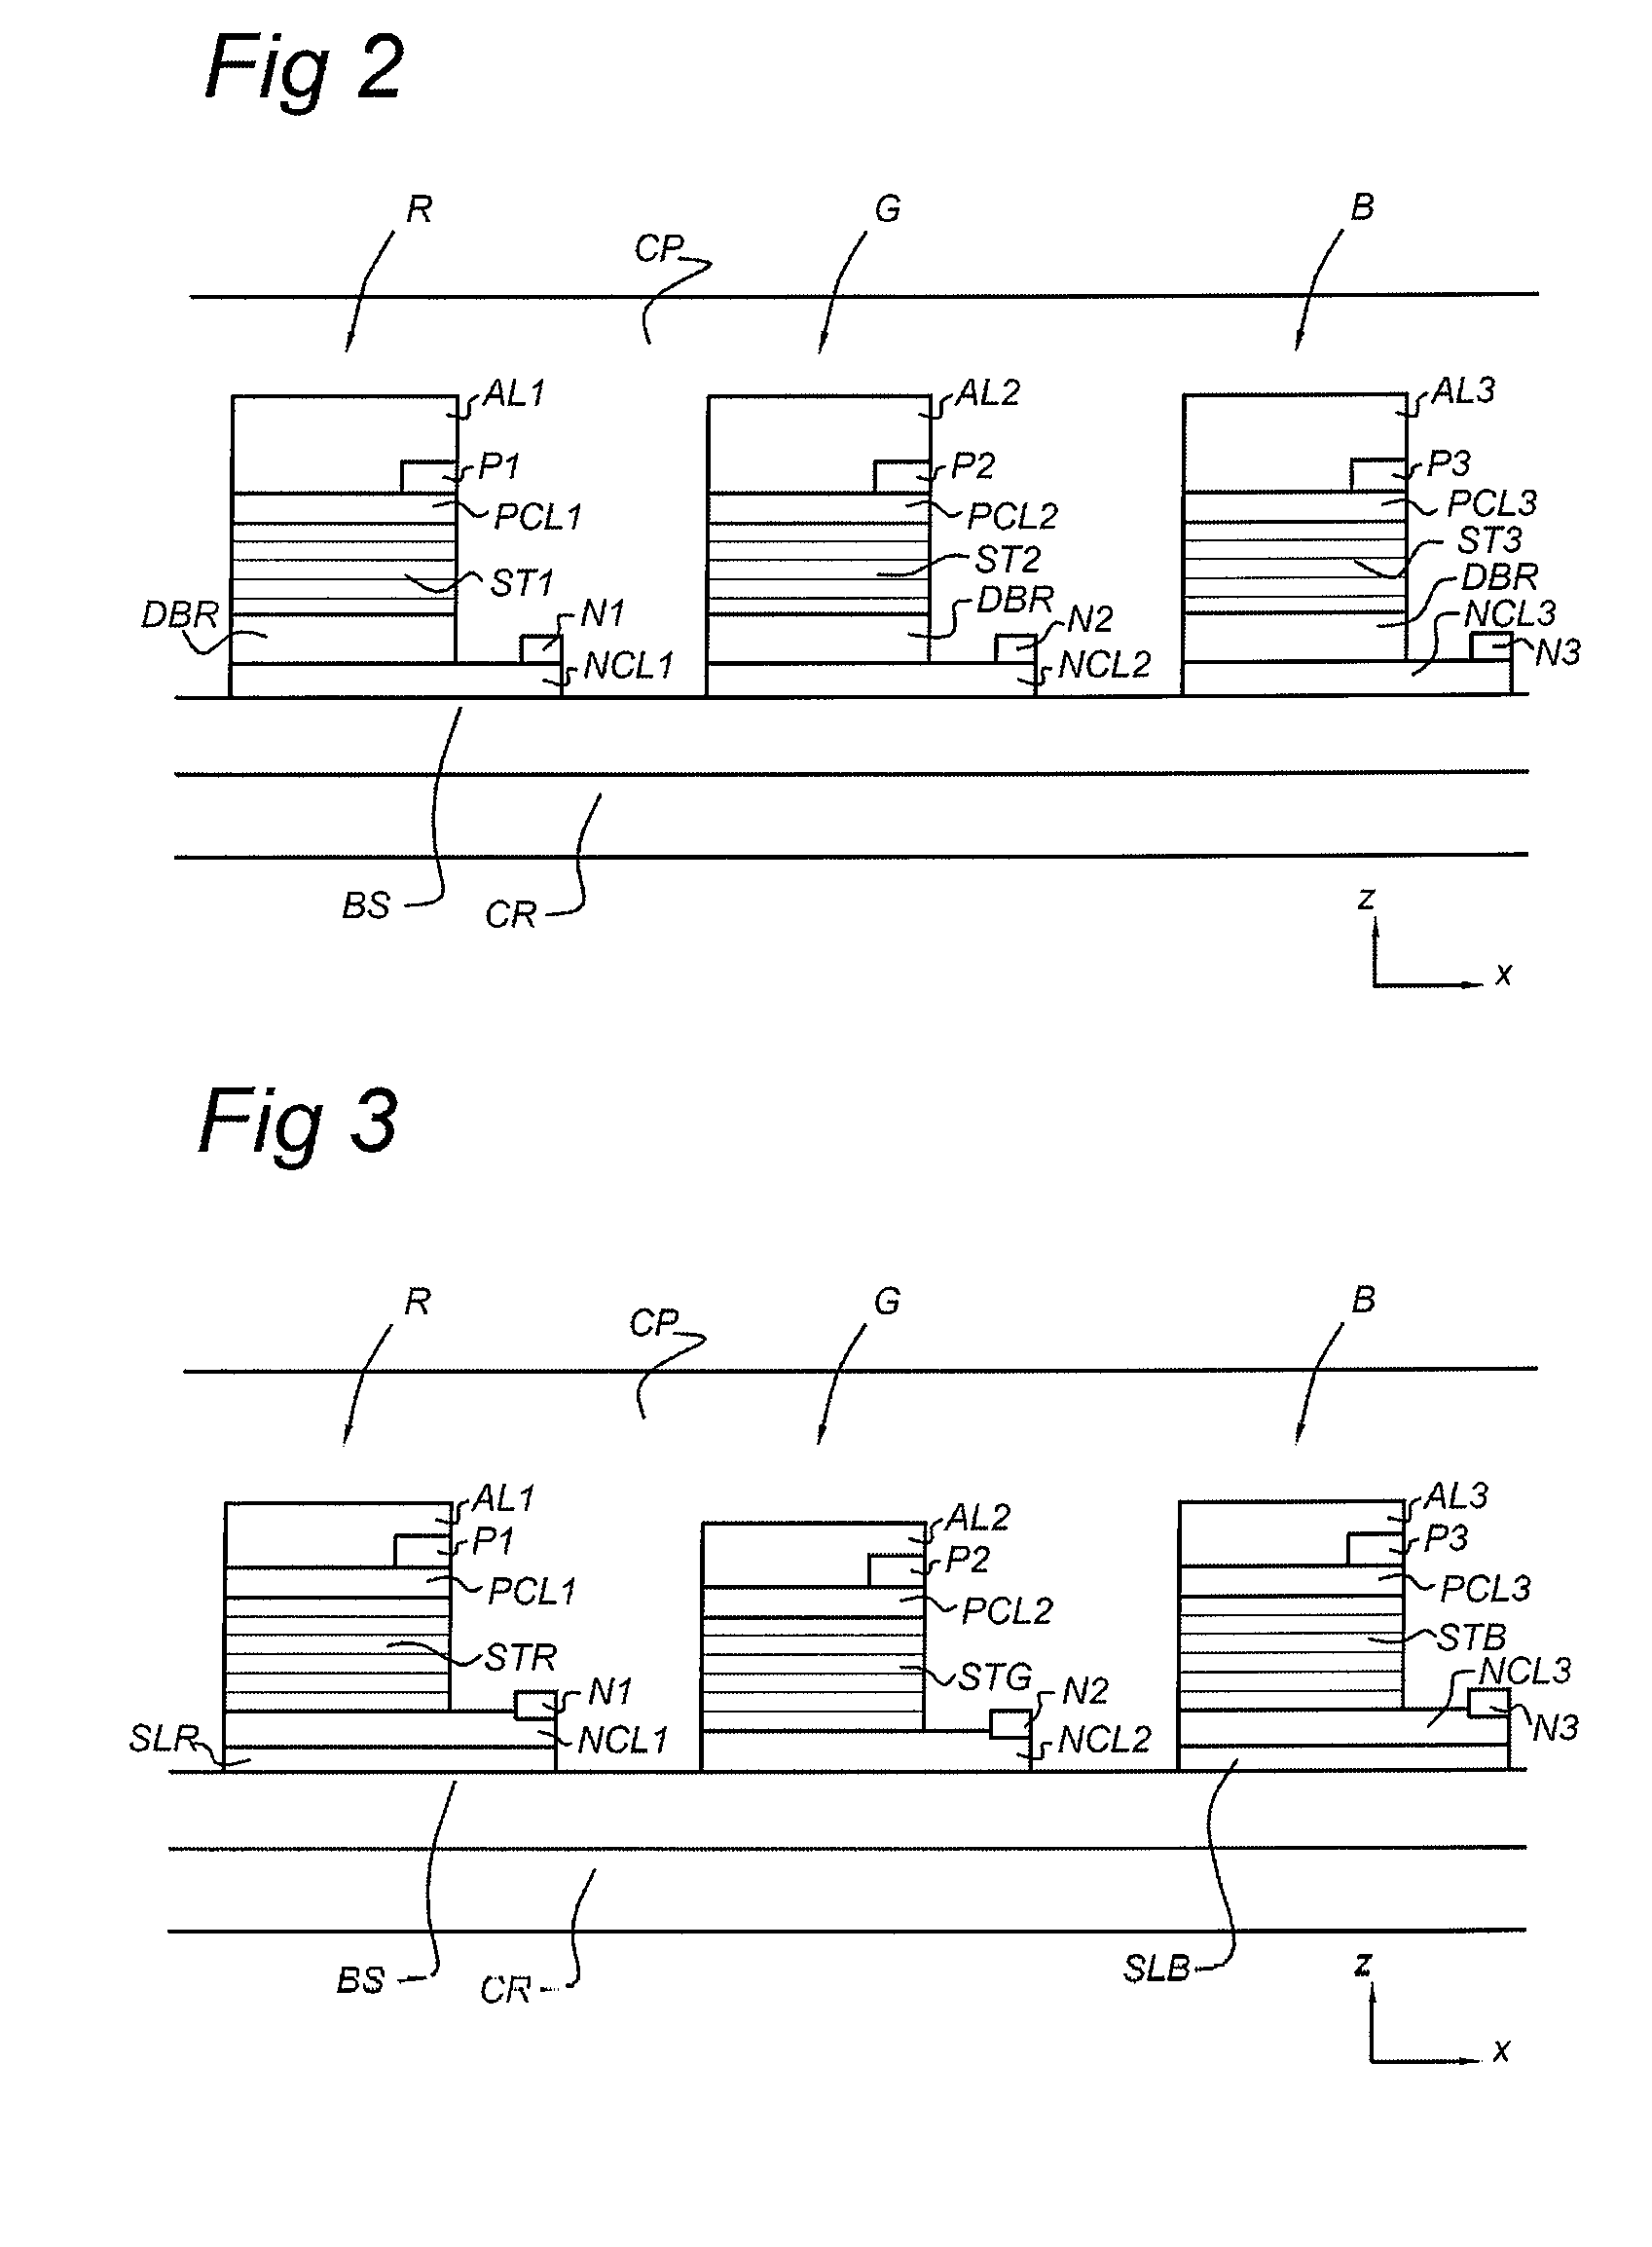 Light-emitting diode arrays and methods of manufacture